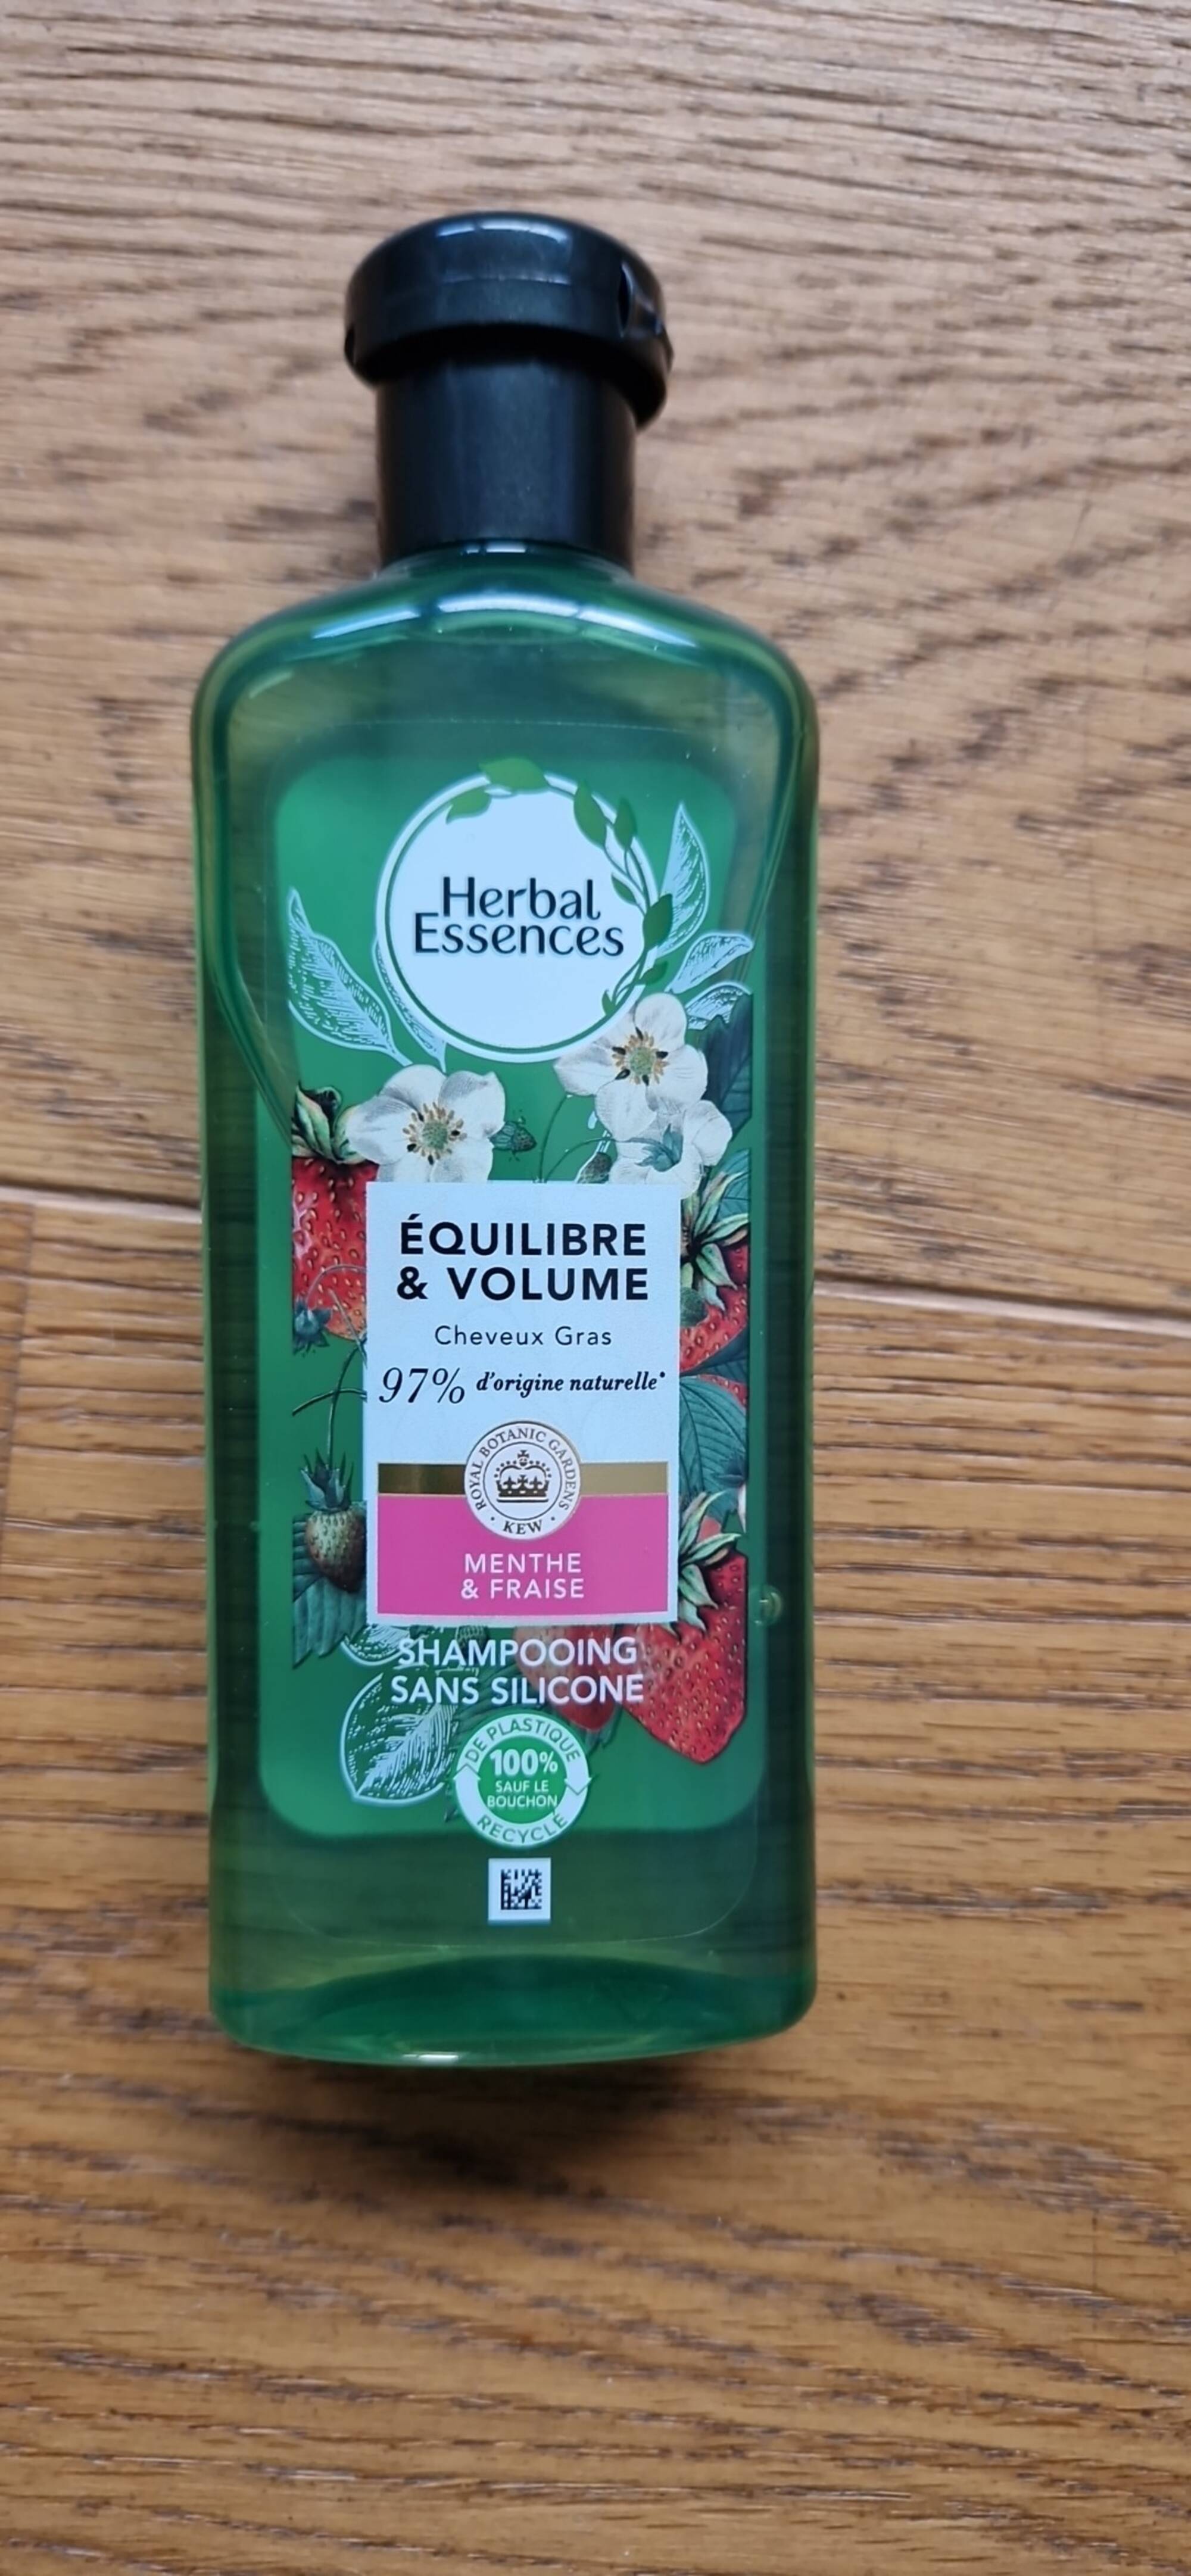 HERBAL ESSENCES - Equilibre & volume - Shampooing sans silicone